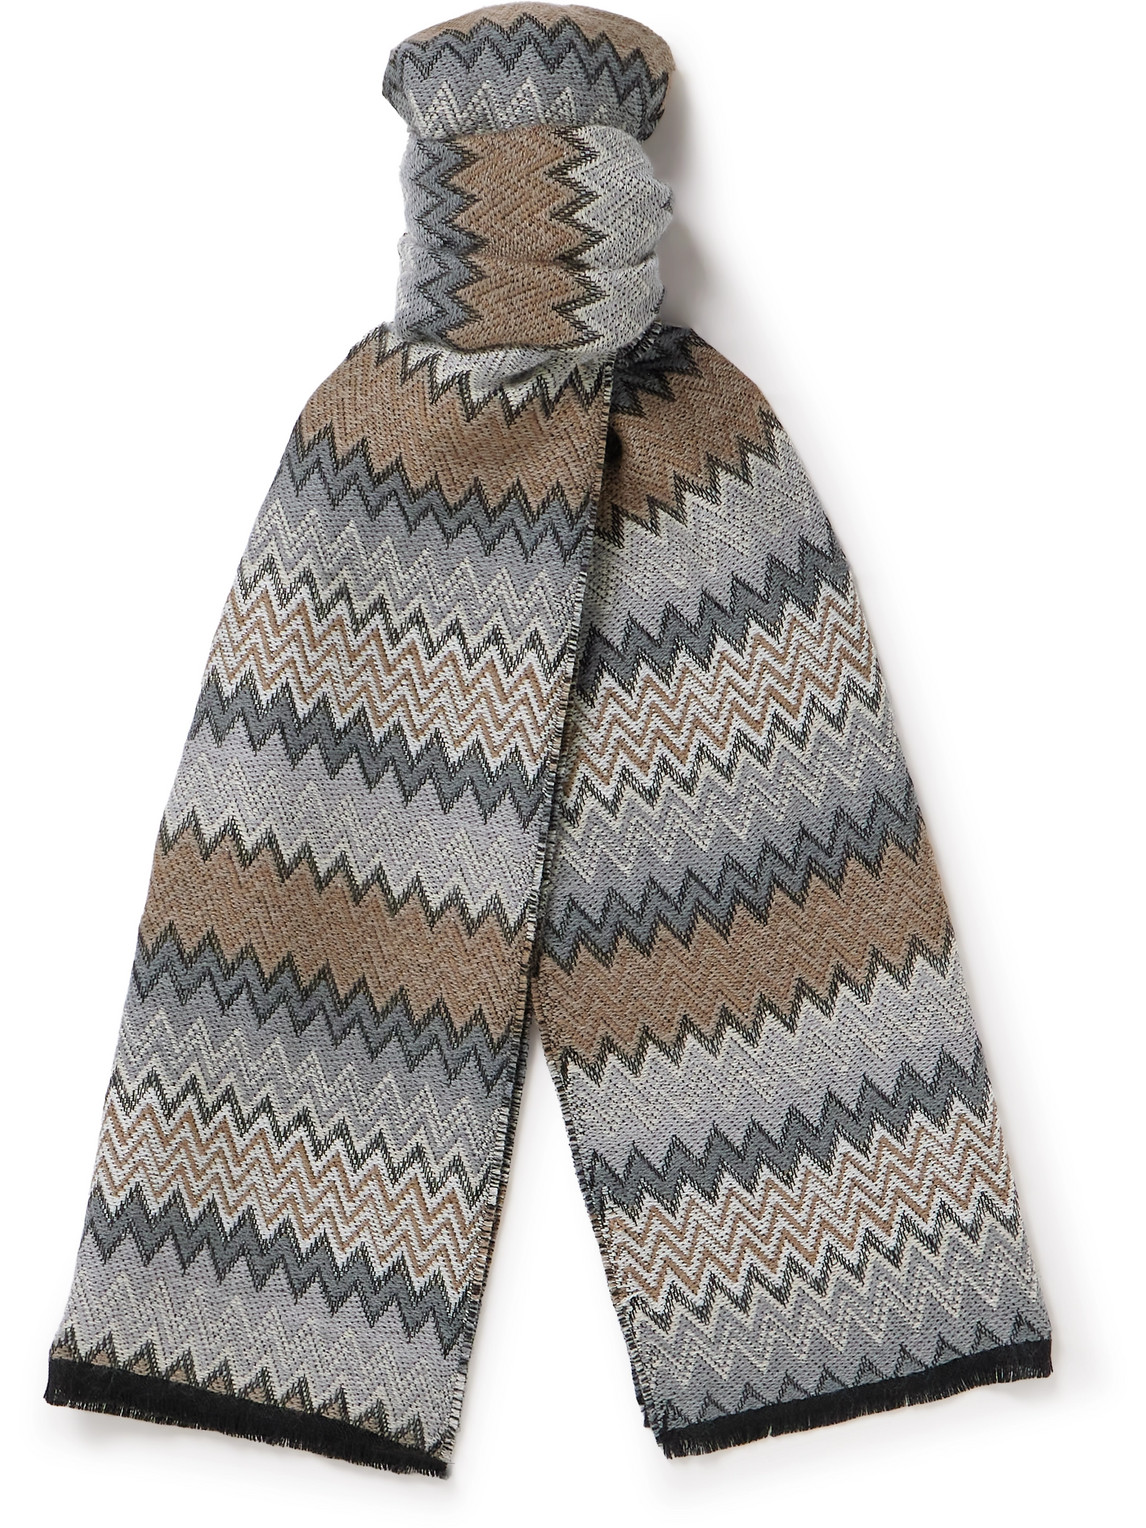 Missoni Fringed Striped Crocheted Cotton Scarf In Grey